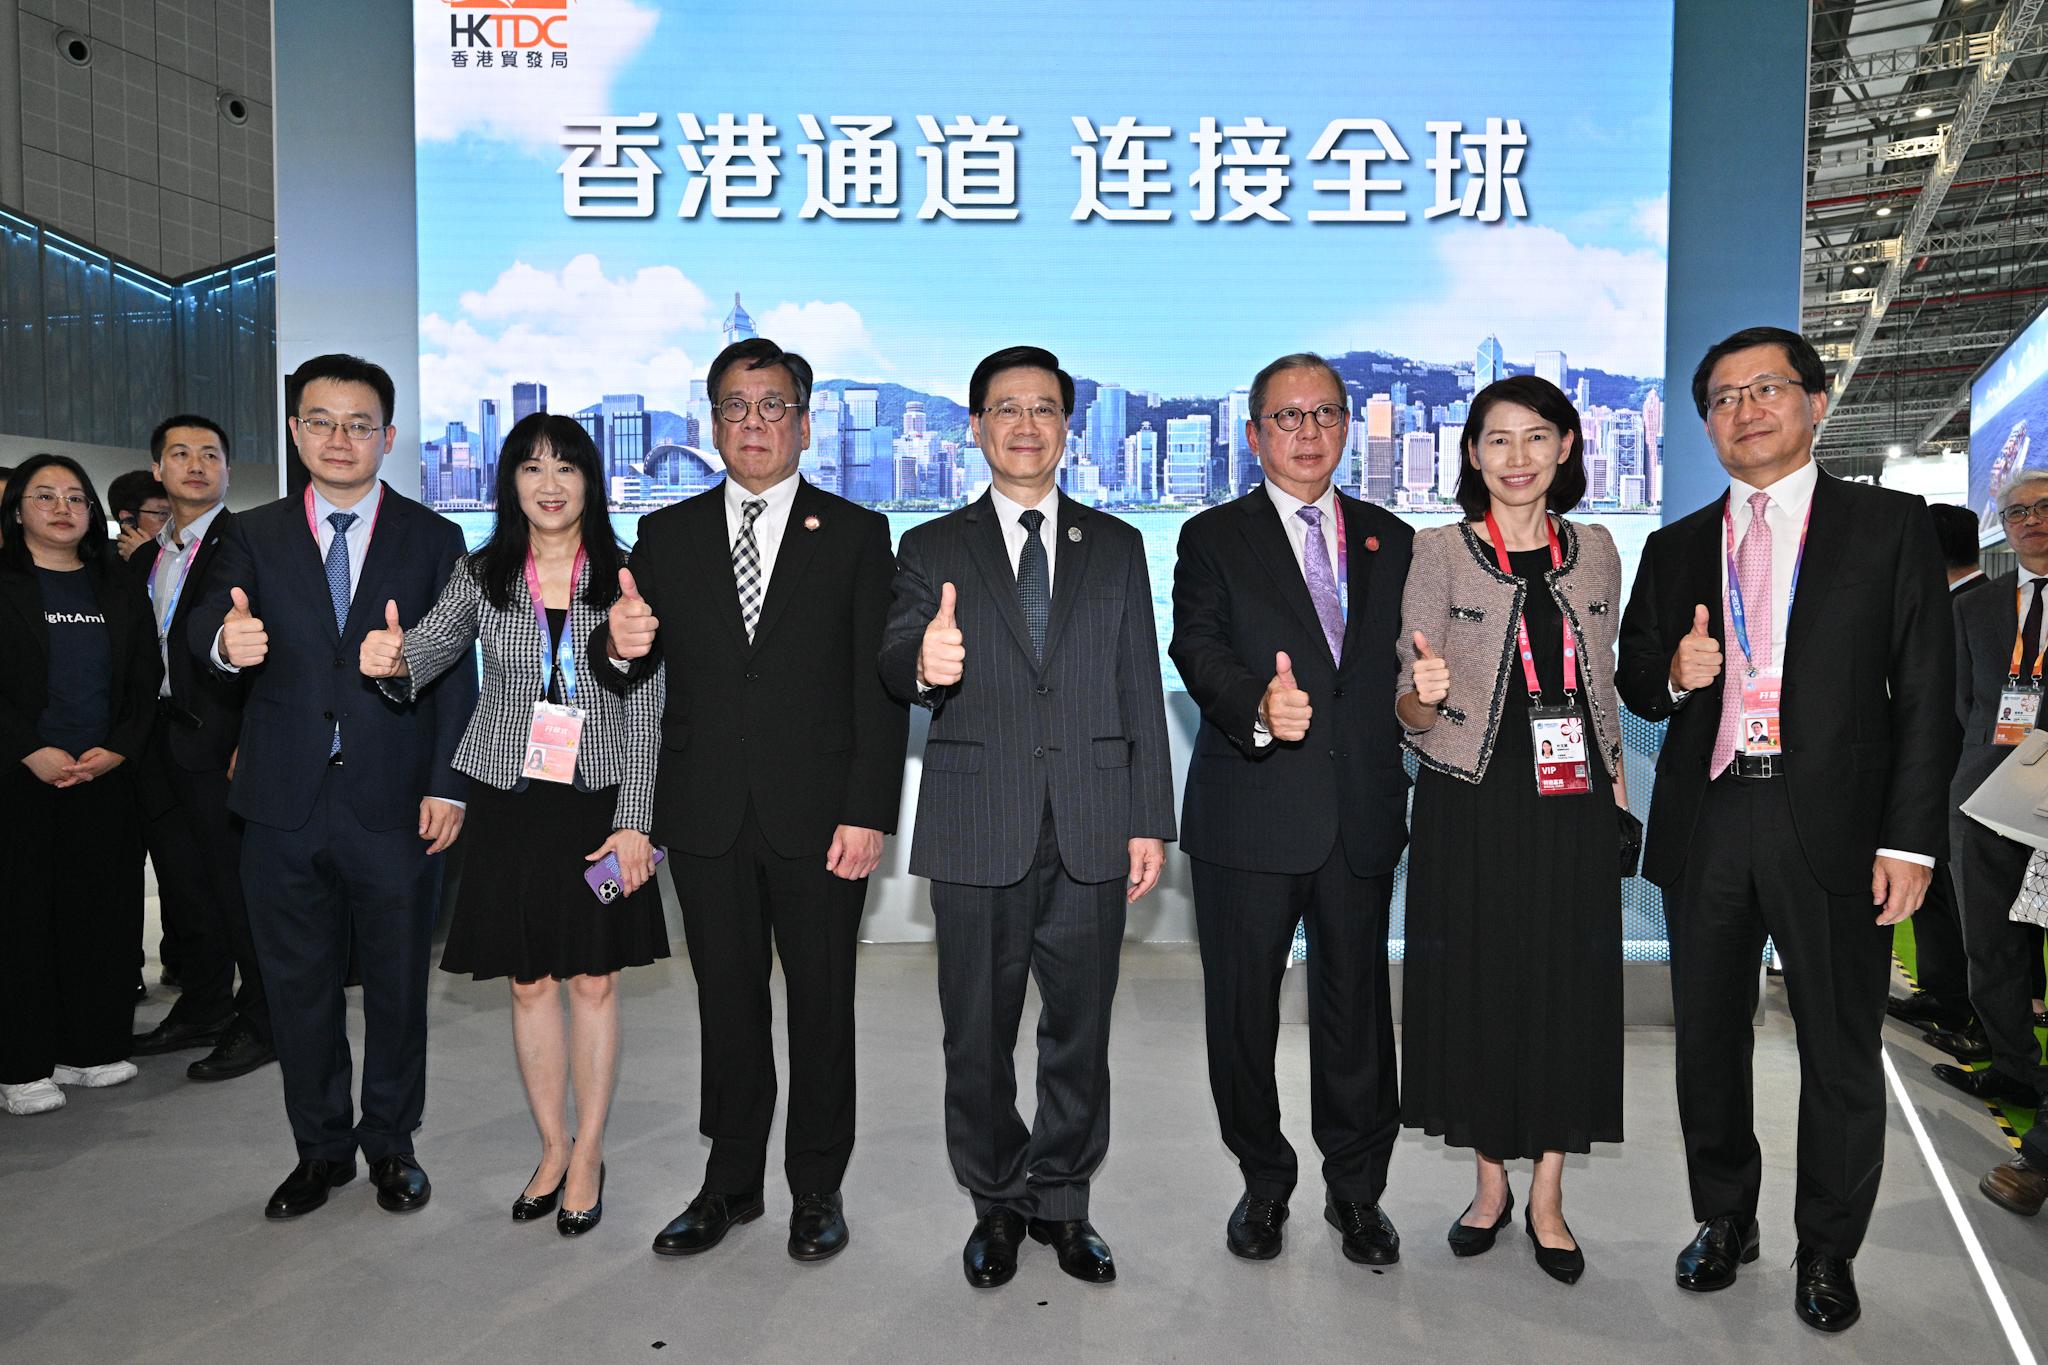 The Chief Executive, Mr John Lee, visited the Hong Kong Exhibition Area of the sixth China International Import Expo in Shanghai today (November 5). Photo shows (from second left) the Executive Director of the Hong Kong Trade Development Council (HKTDC), Ms Margaret Fong; the Secretary for Commerce and Economic Development, Mr Algernon Yau; Mr Lee; the Chairman of the HKTDC, Dr Peter Lam; the Director of the Chief Executive's Office, Ms Carol Yip; and the Chief Executive Officer of the Airport Authority Hong Kong, Mr Fred Lam, at the Hong Kong Service Pavilion.